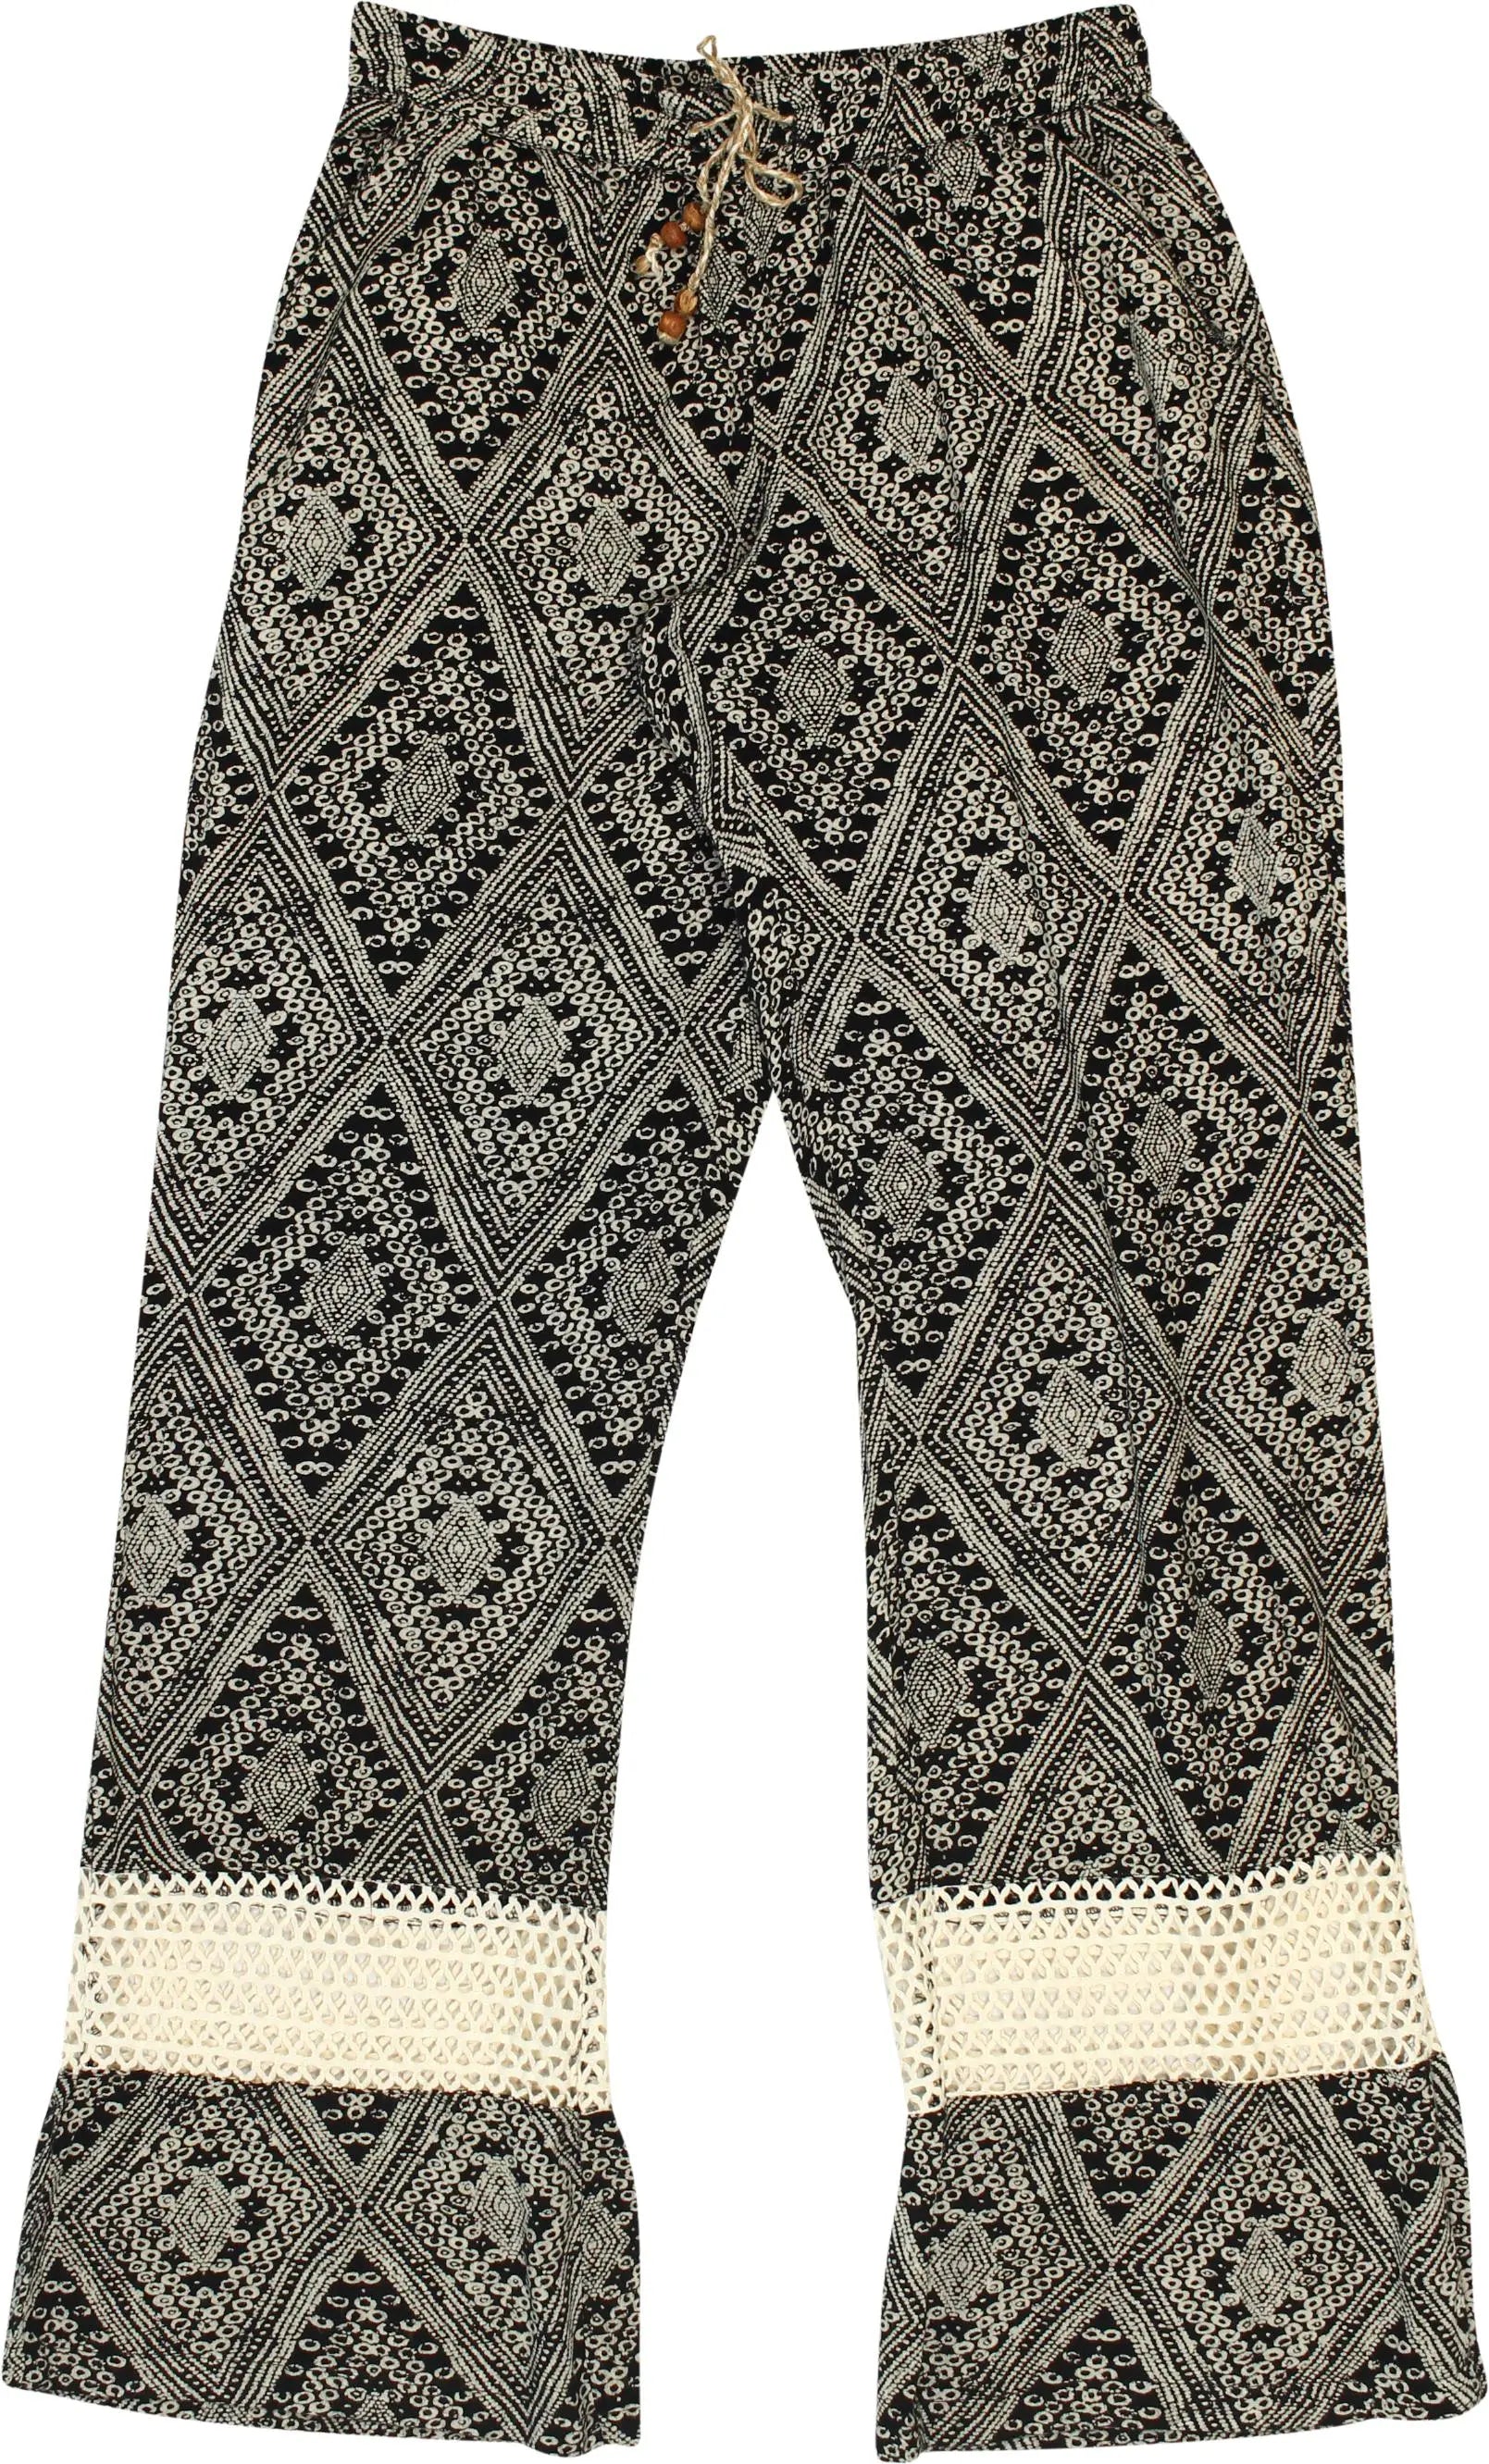 Hippie Laundry - Beach Pants- ThriftTale.com - Vintage and second handclothing